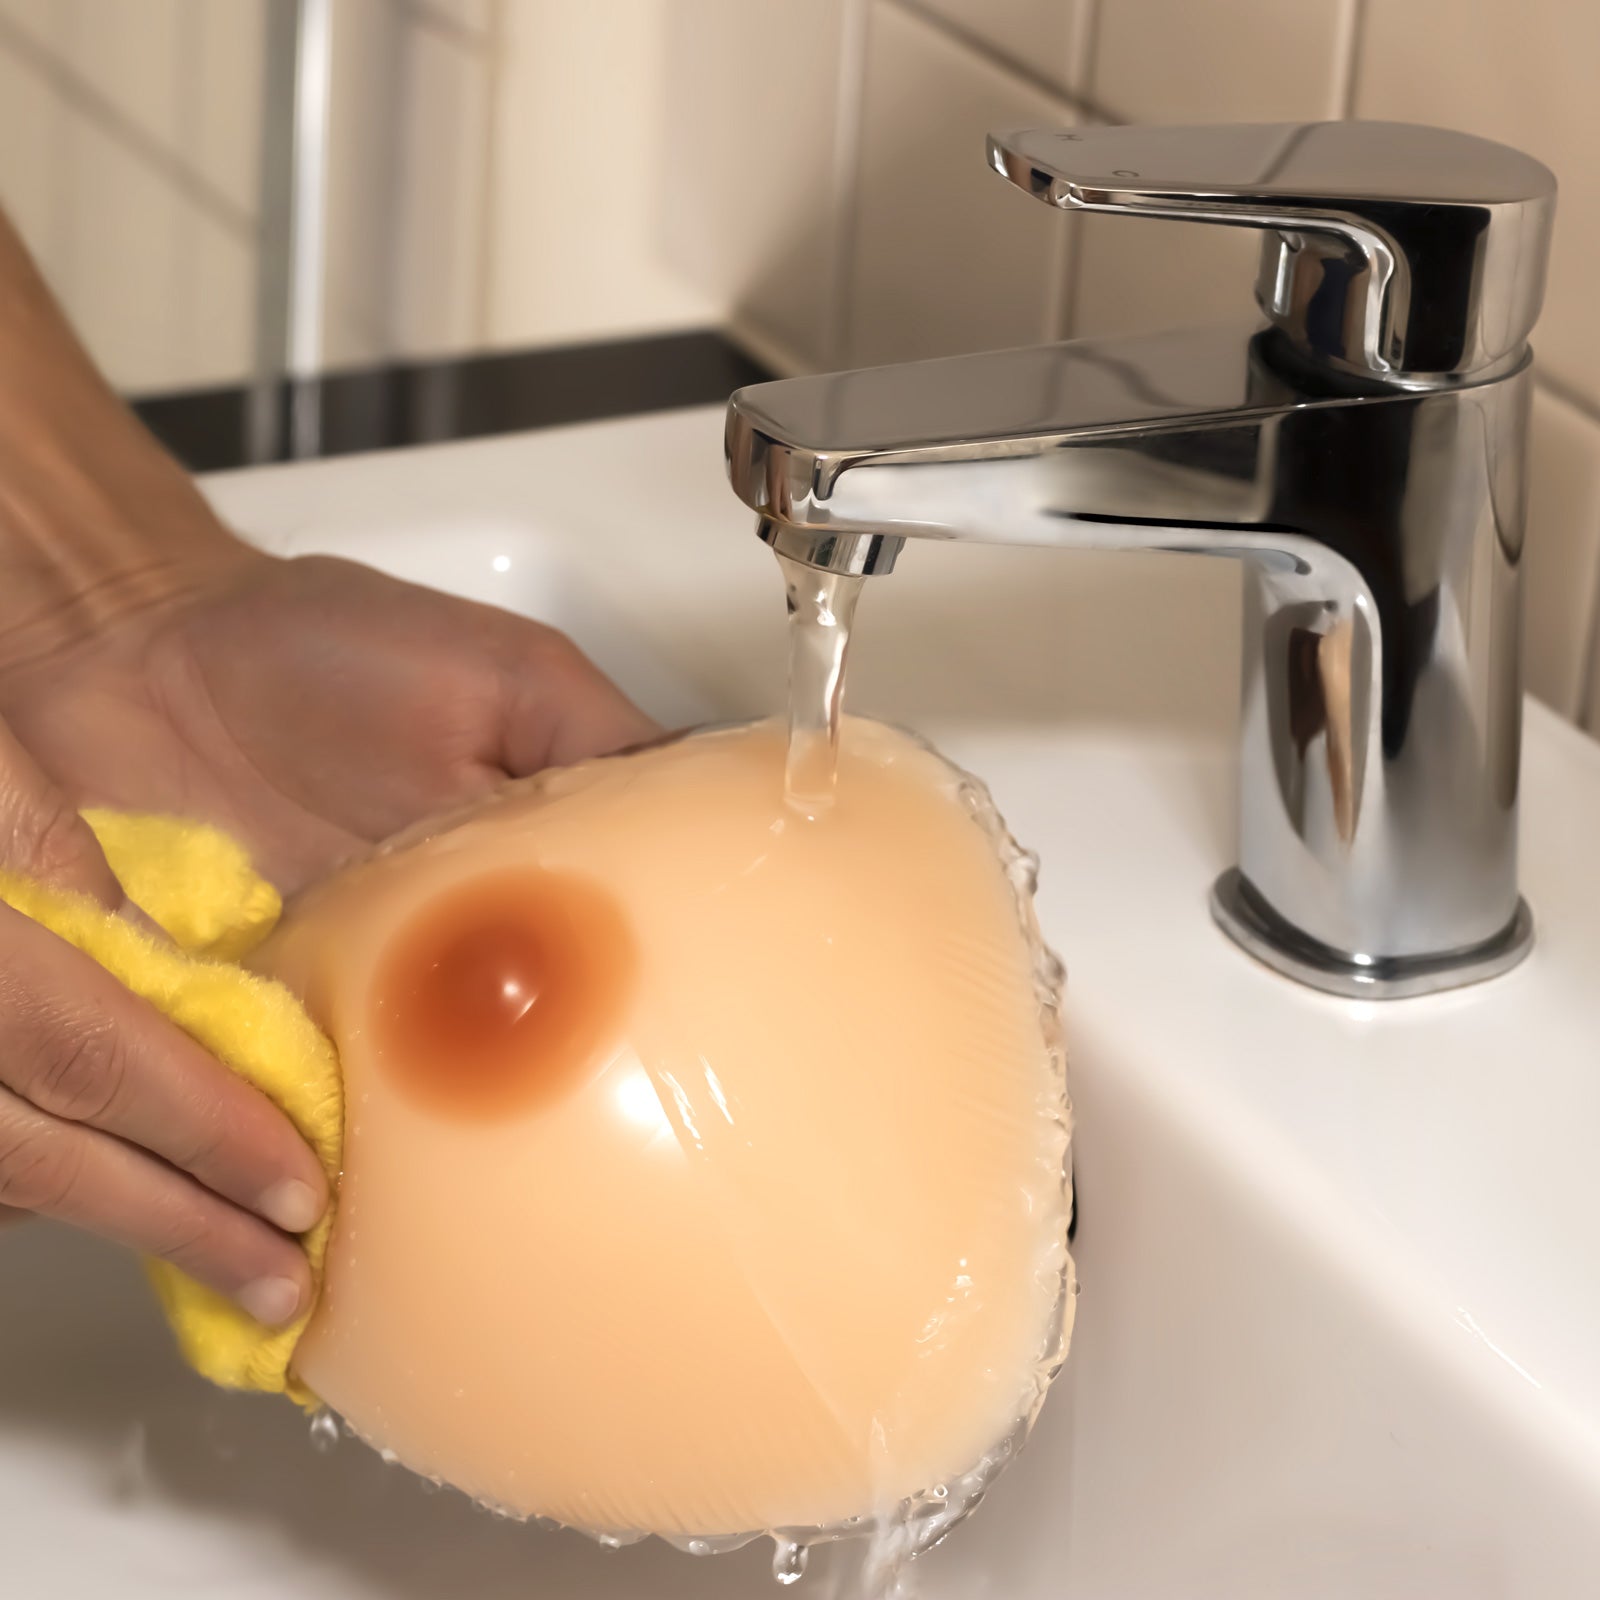 Washing breast form with water